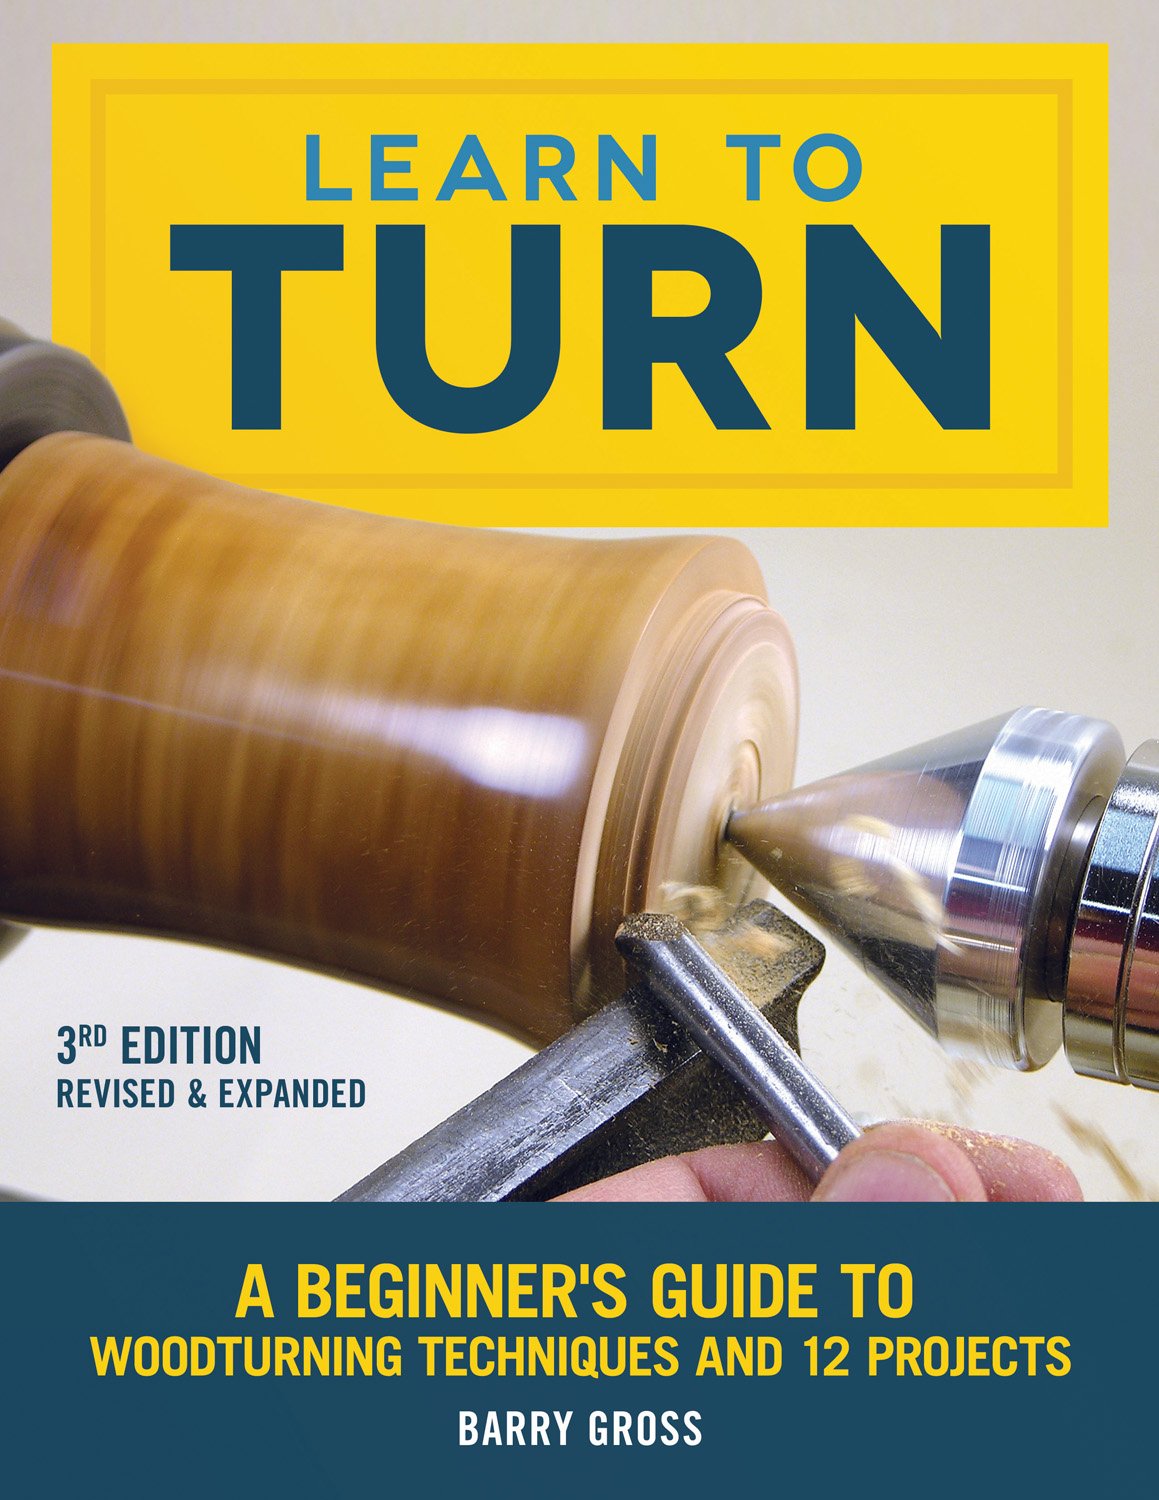 Learn to Turn, 3rd Edition Revised & Expanded: A Beginner's Guide to Woodturning Techniques and 12 Projects (Fox Chapel Publishing) Step-by-Step